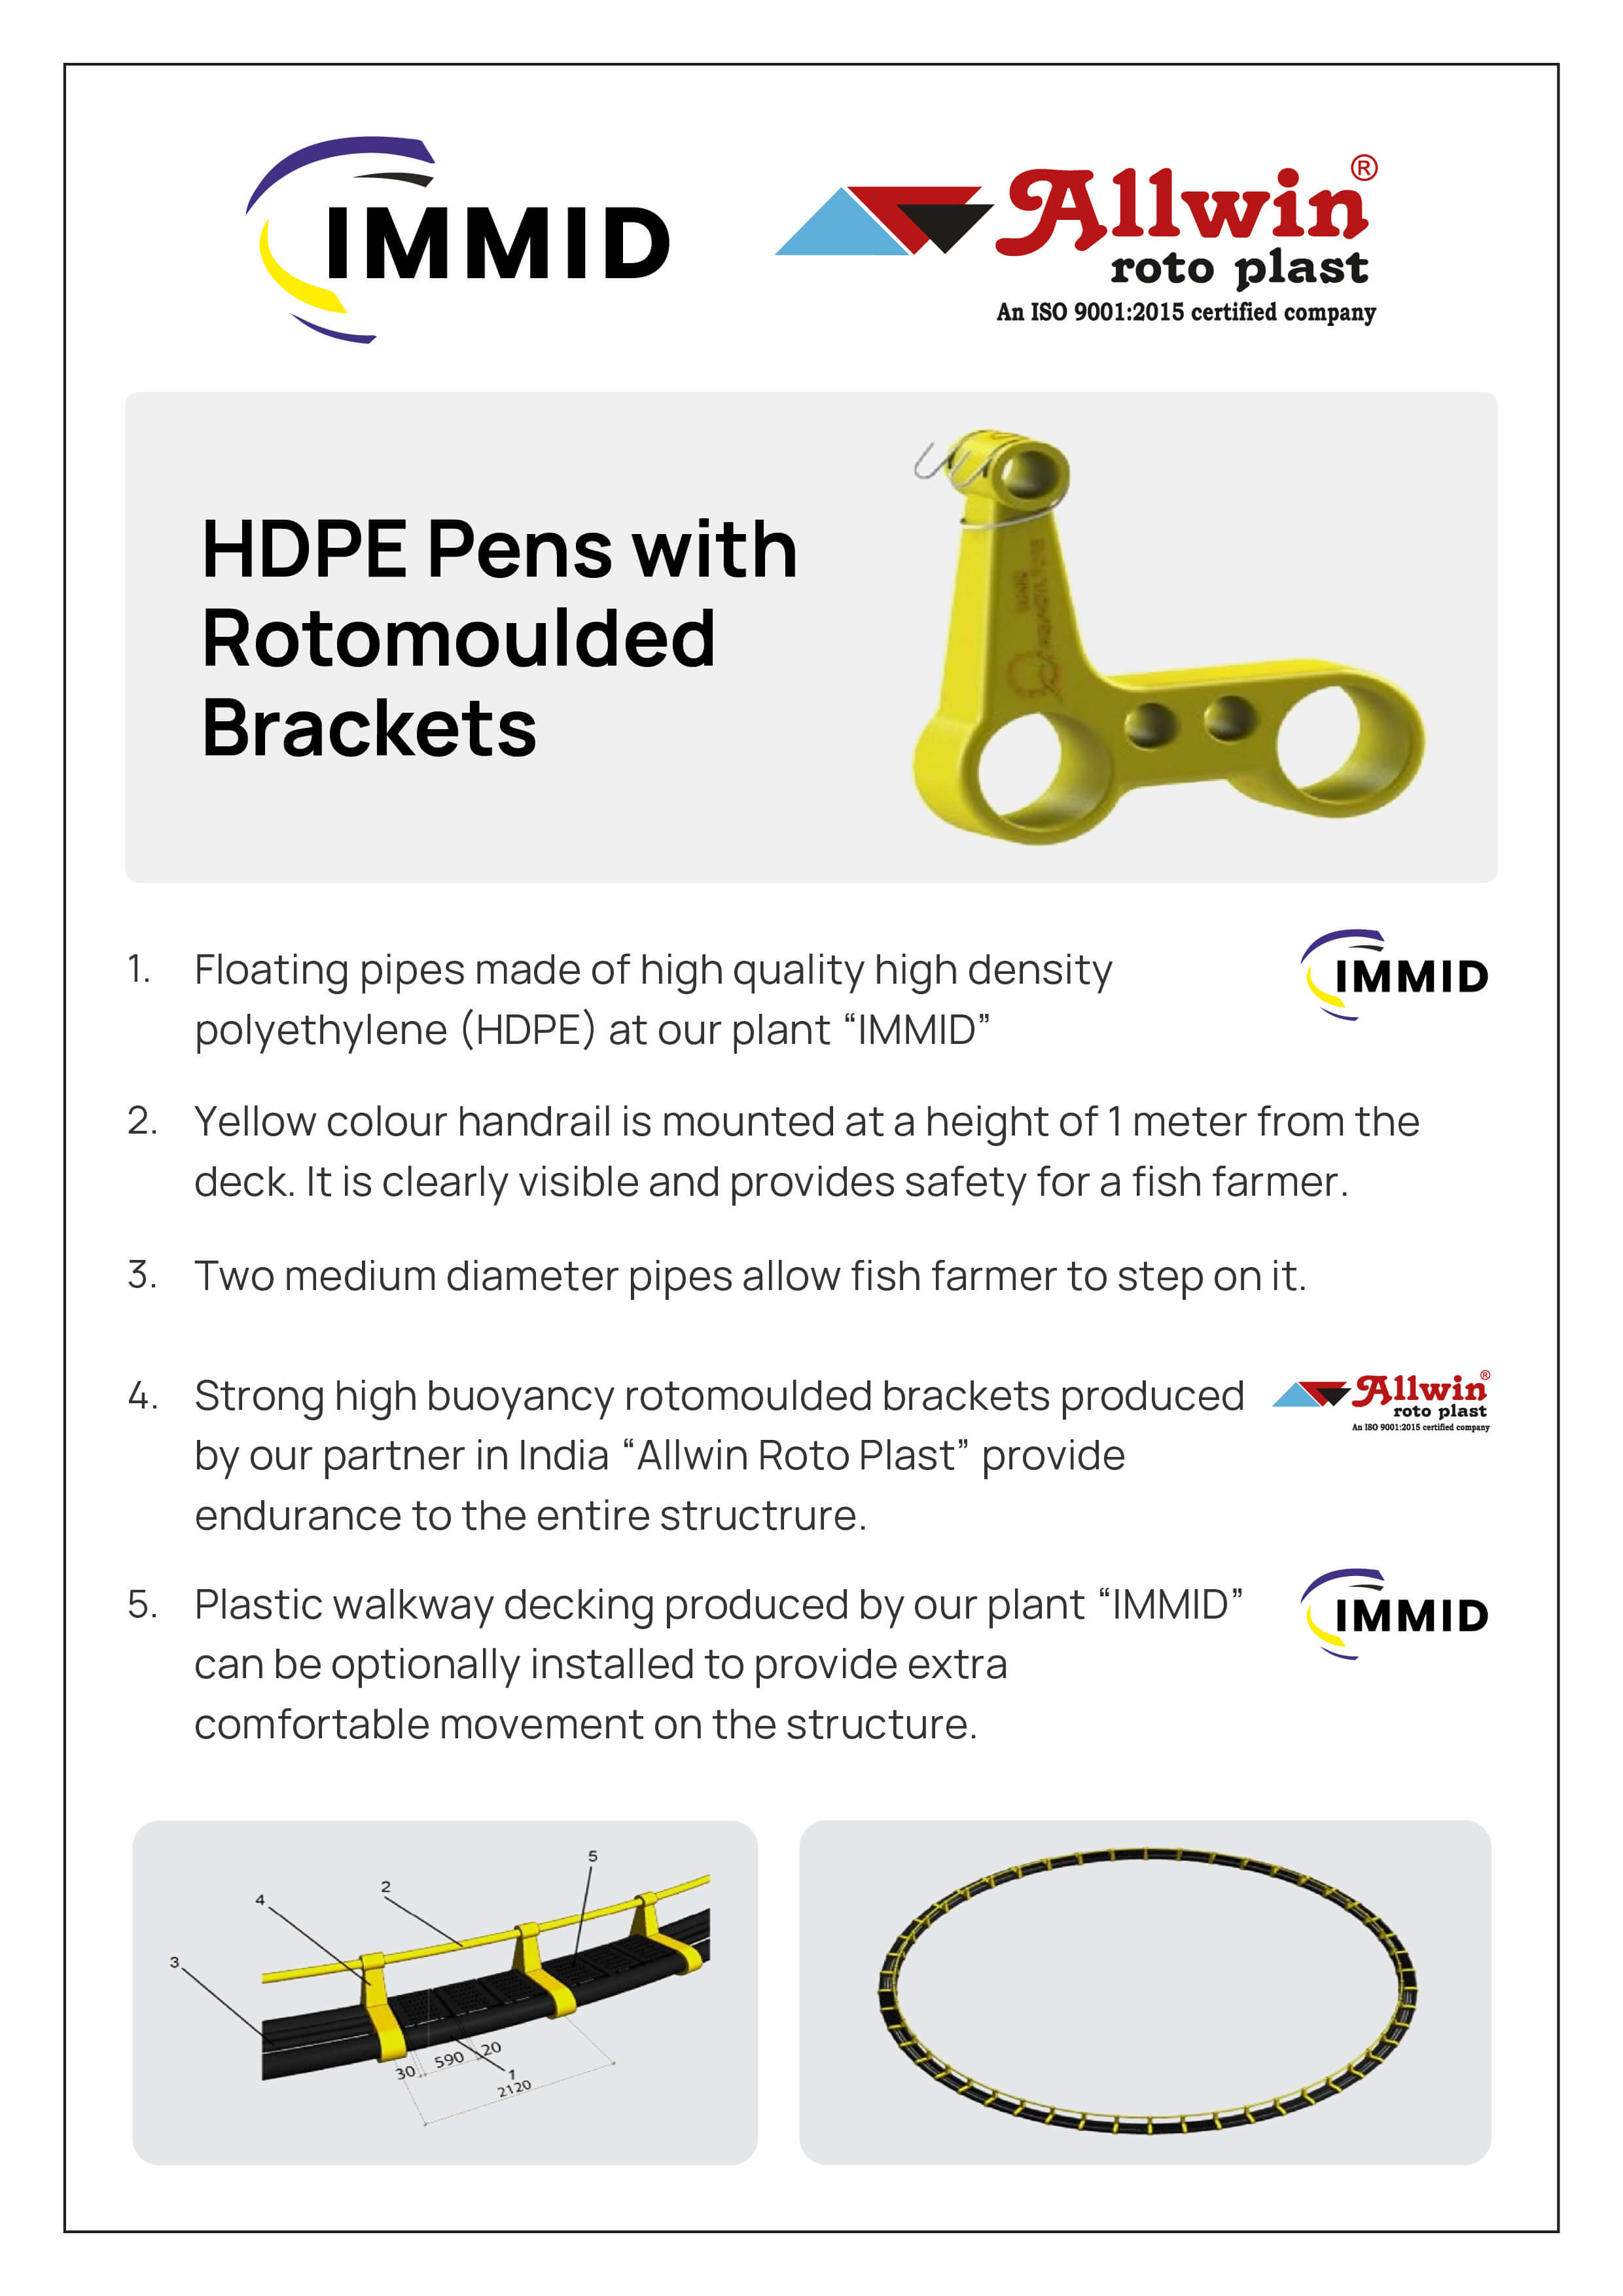 IMMID : HDPE Pens with Rotomoulded Brackets